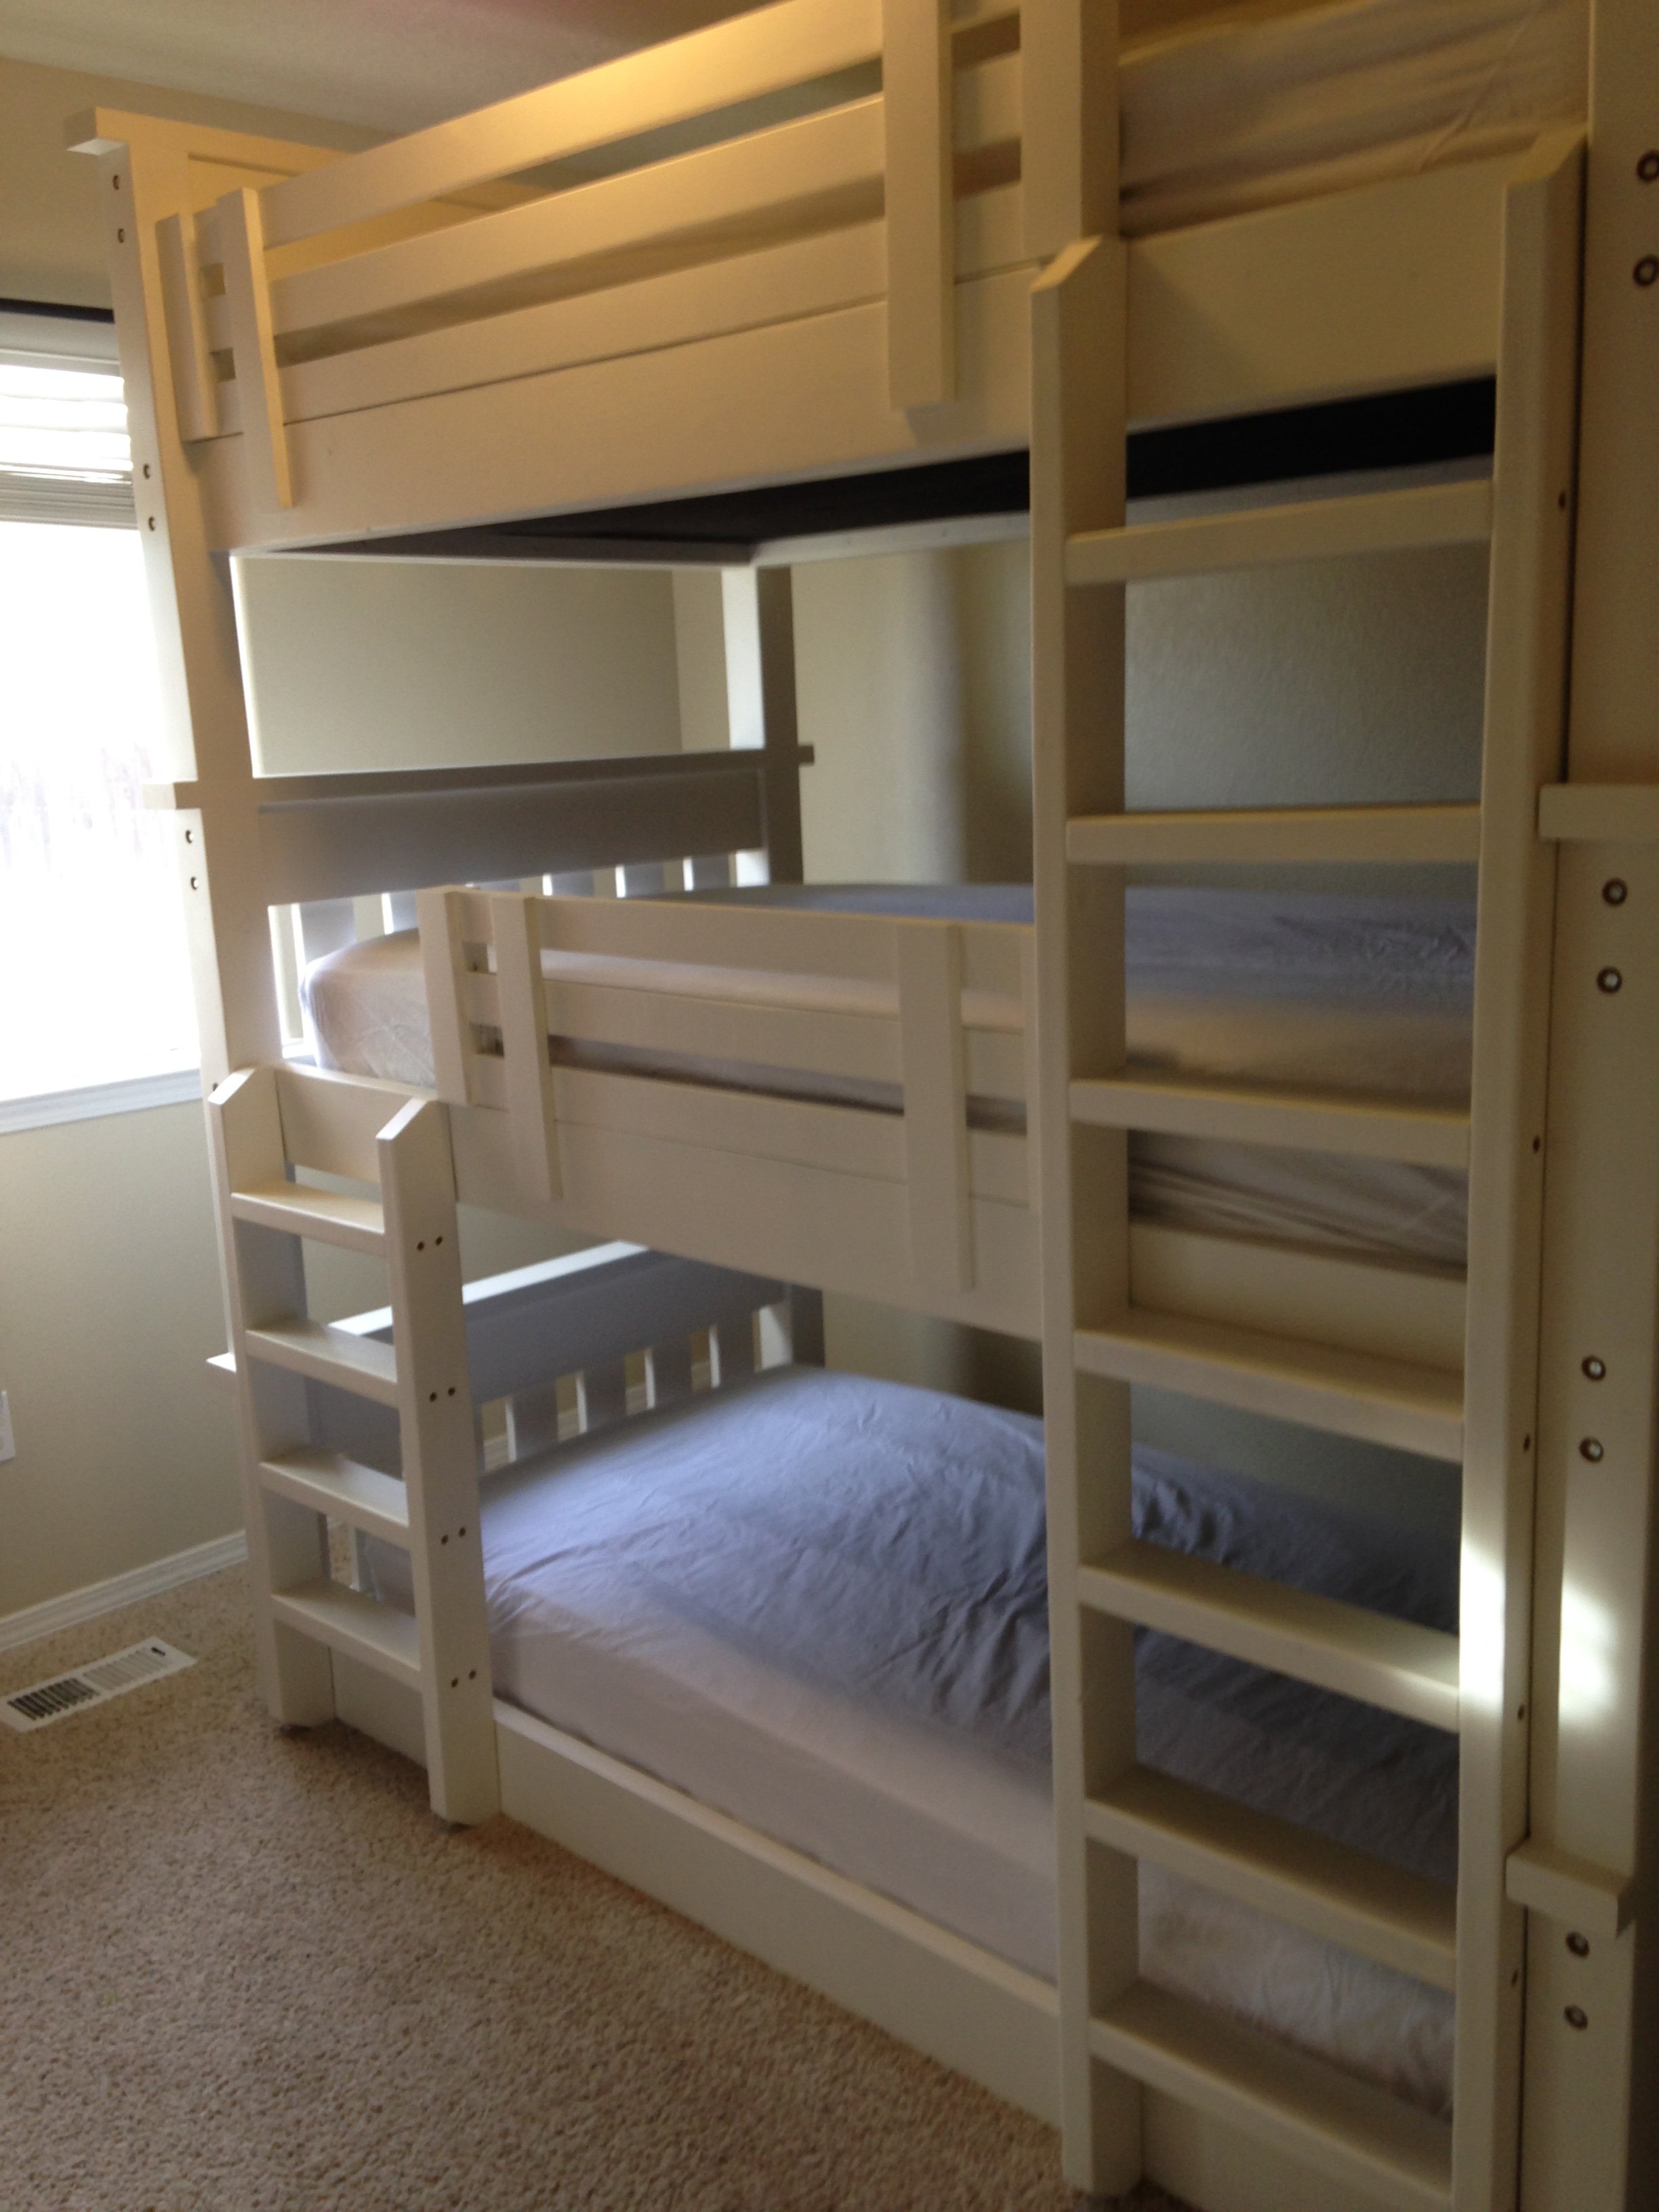 Simple Bunk Bed Triple Ana White, 3 Tier Bunk Bed Plans